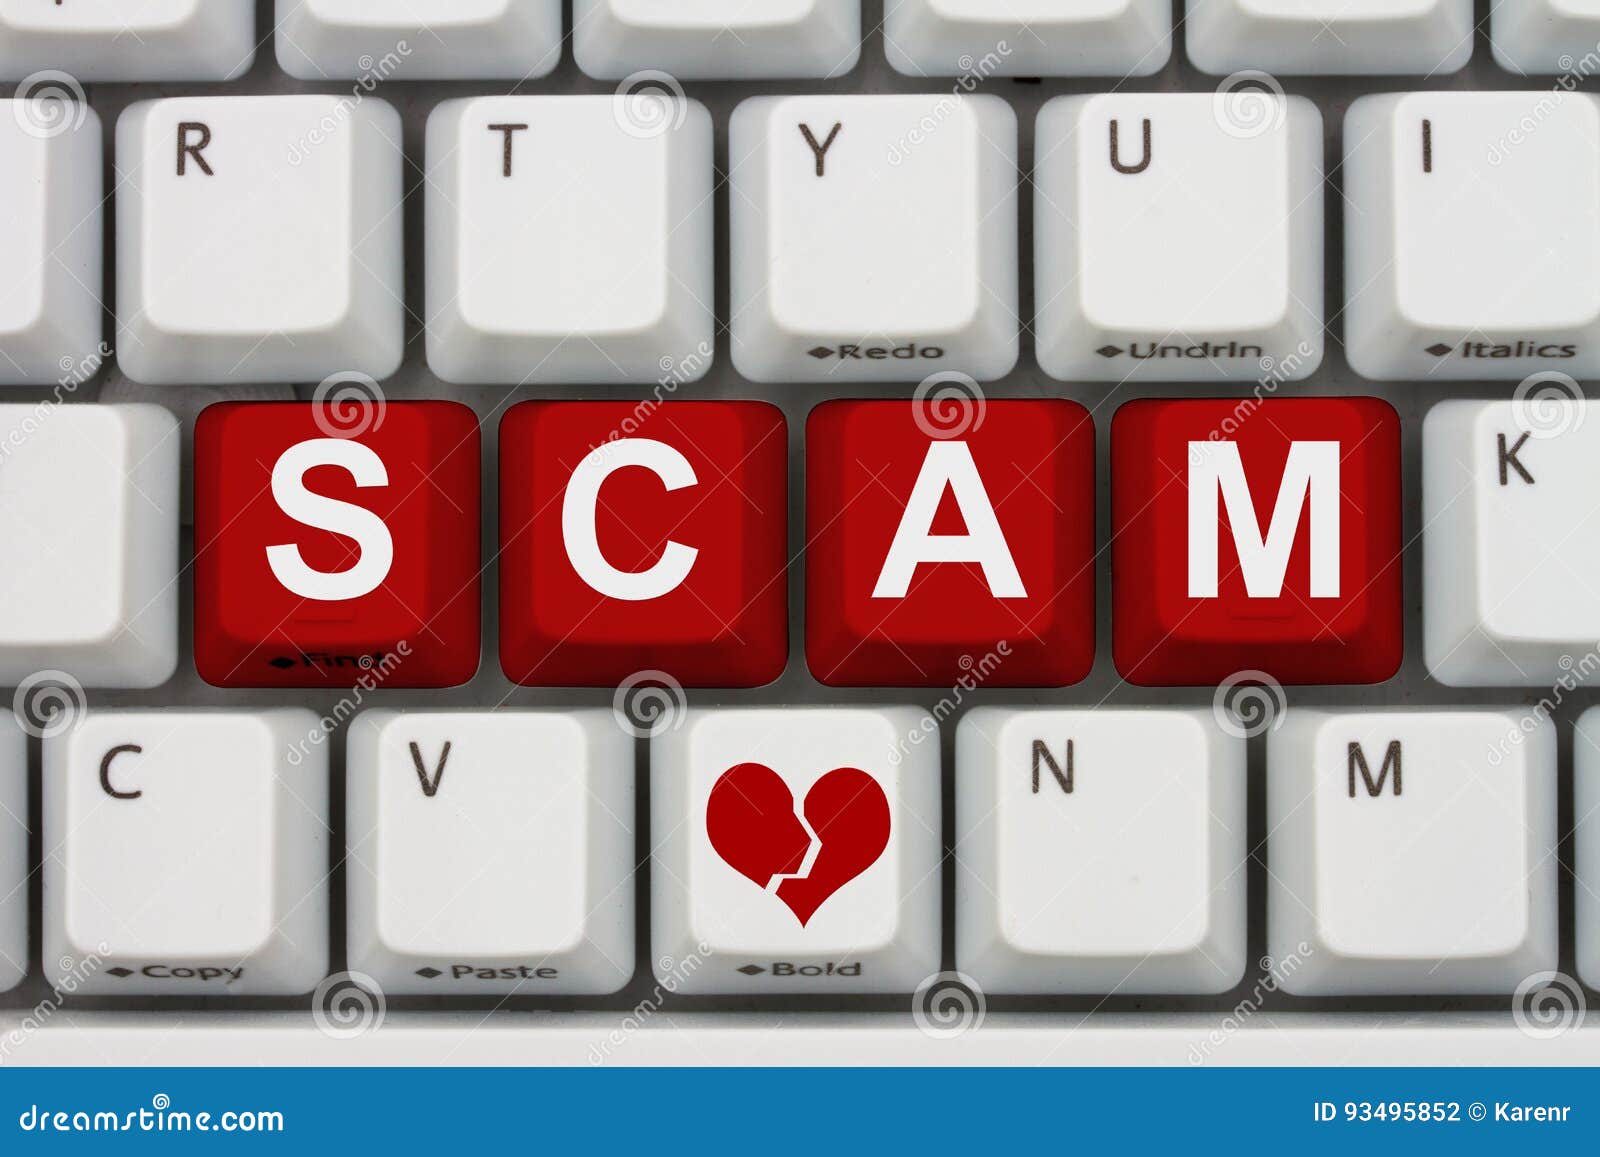 dating scams on the internet